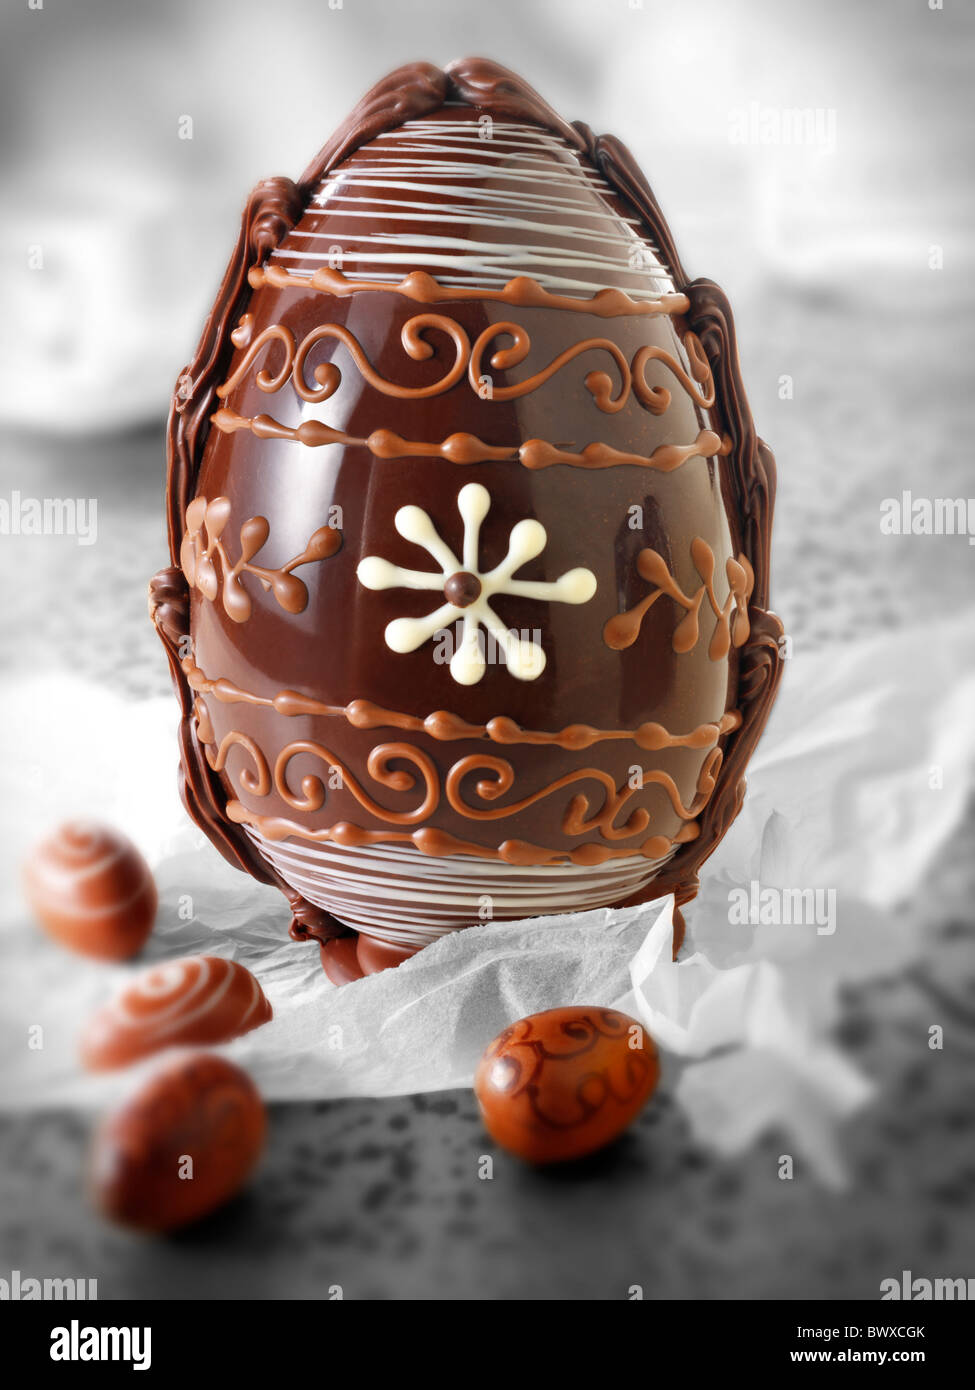 Easter Eggs Decorated With Botanical Patterns decoupage In Nest Of Straw In  Bowl Photograph by Great Stock! - Pixels